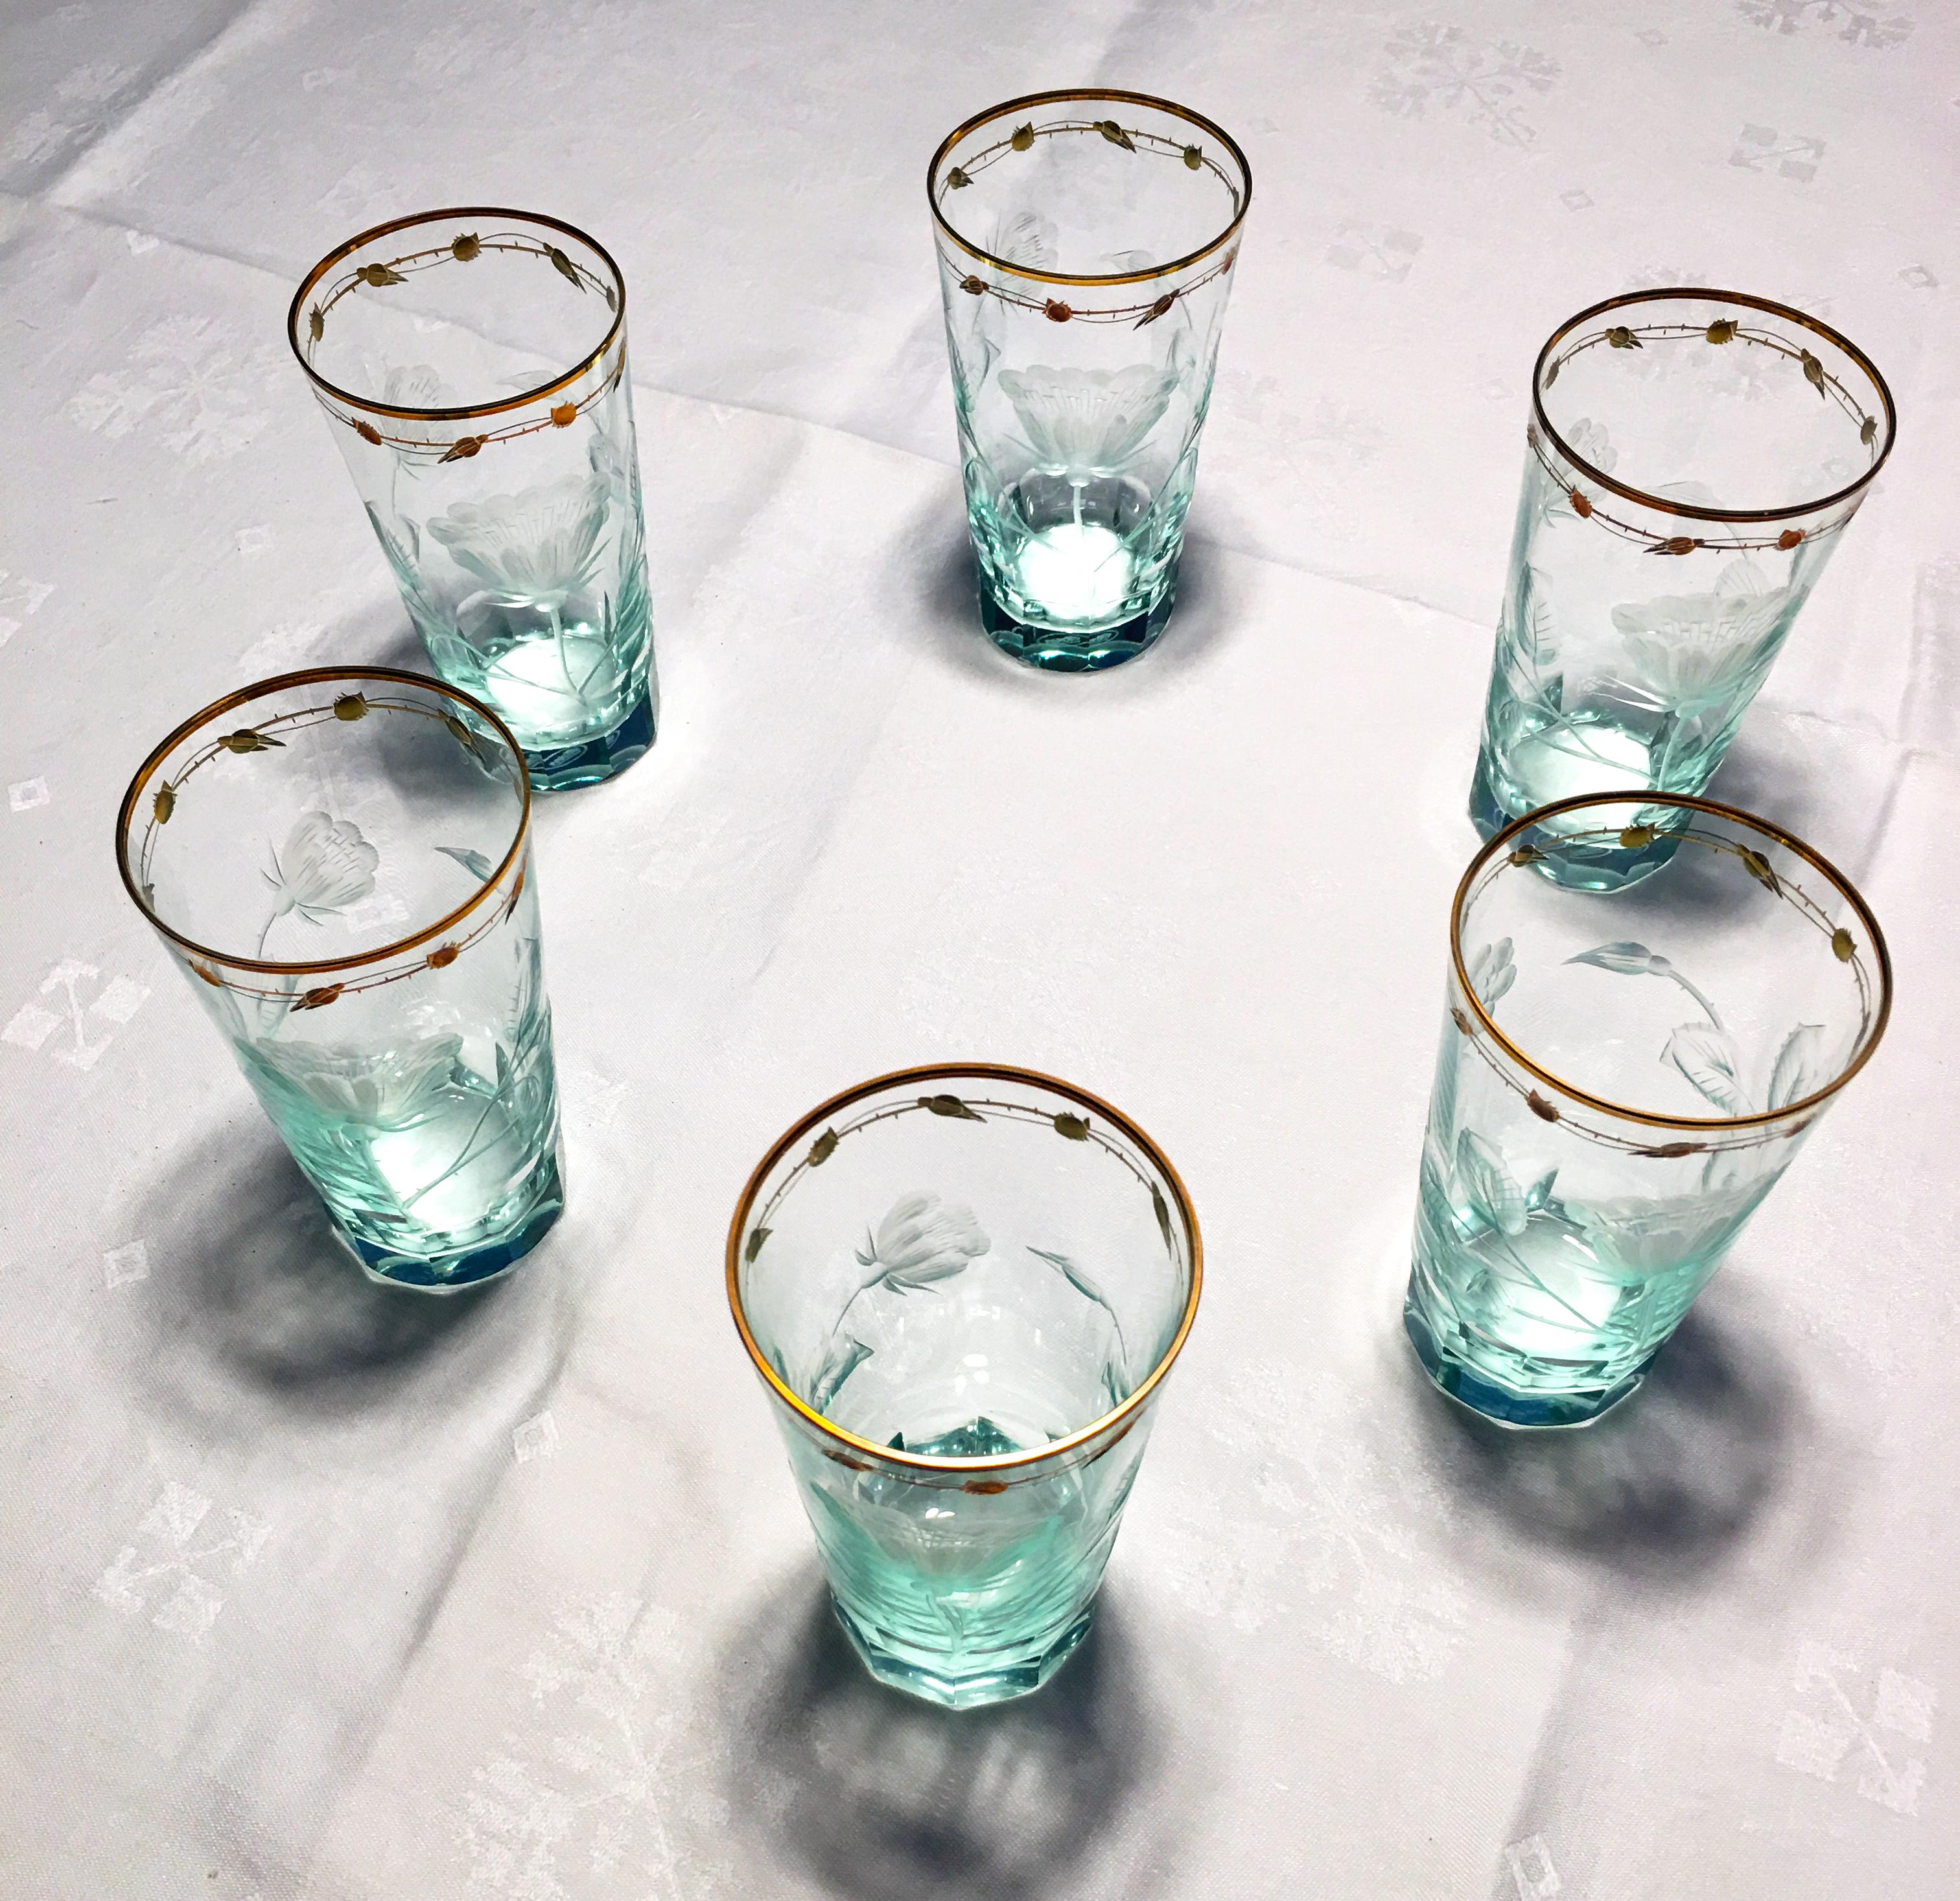 Czech Very Rare Turquoise, Art Nouveau Hand Blown, Gilded Glasses 'Paula' by Moser